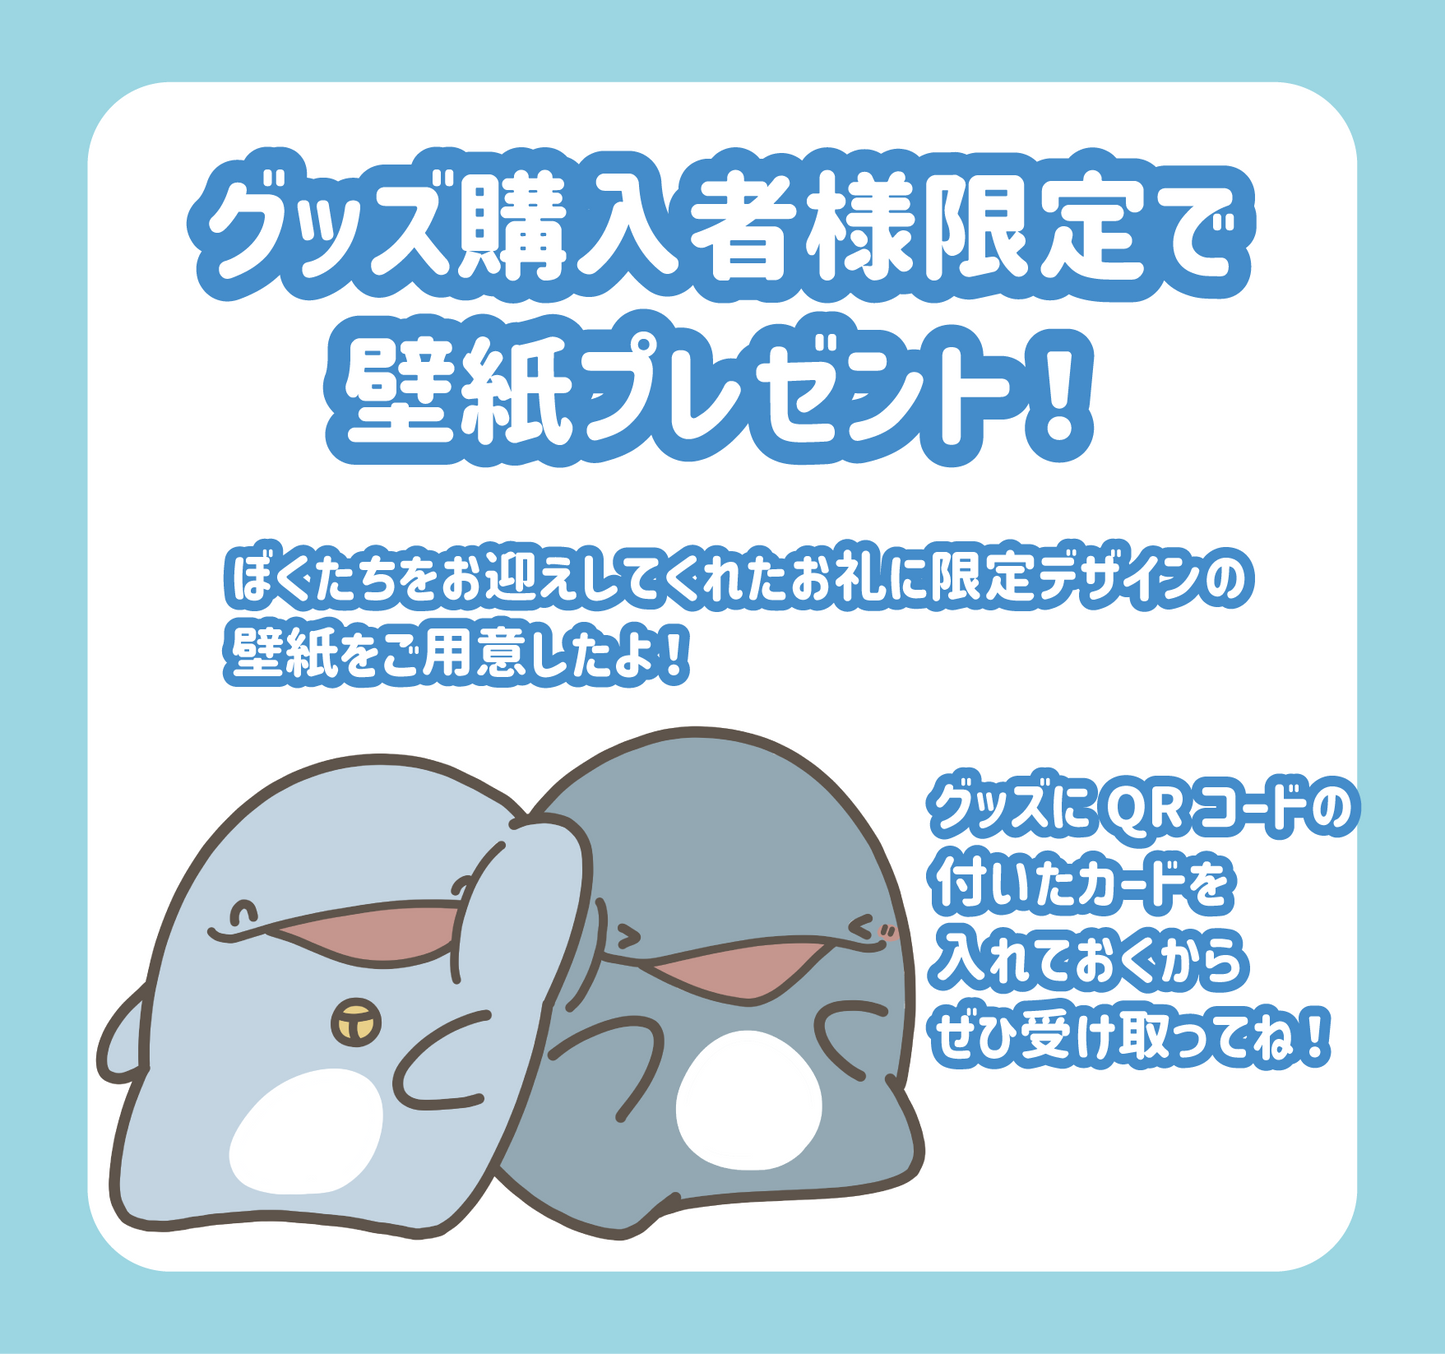 [Parent and child dolphin] Flake sticker (parent and child dolphin)